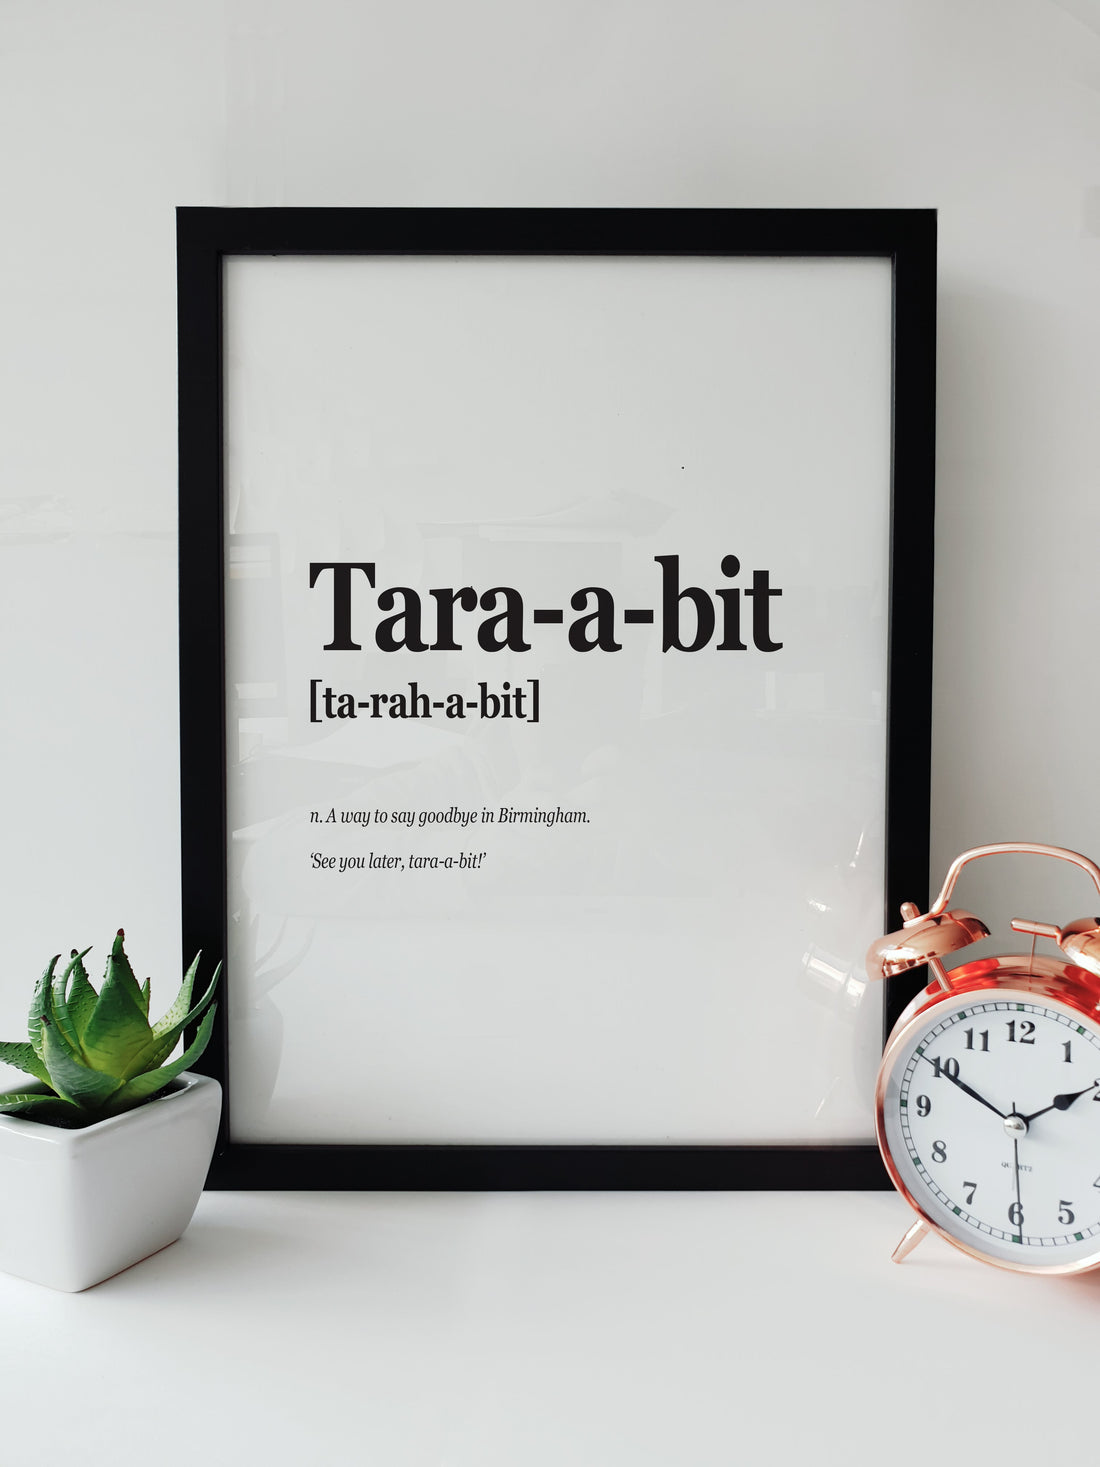 Tara-a-bit funny Brummie accent translation poster by Local Lingo